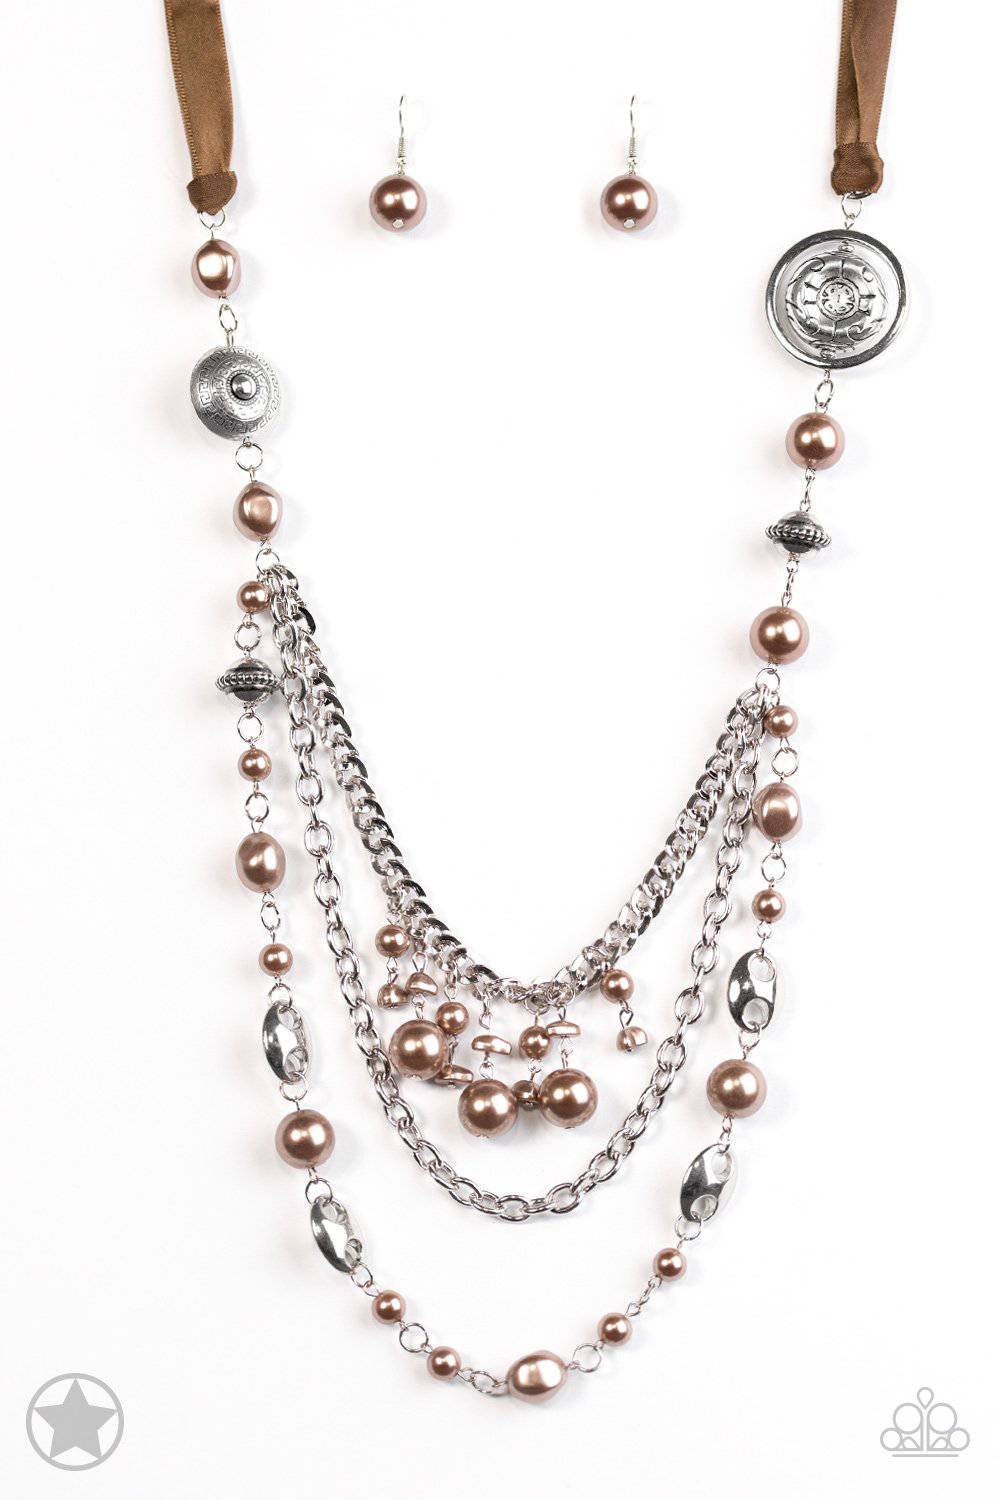 All The Trimmings - Brown Pearl Necklace - Paparazzi Accessories - GlaMarous Titi Jewels